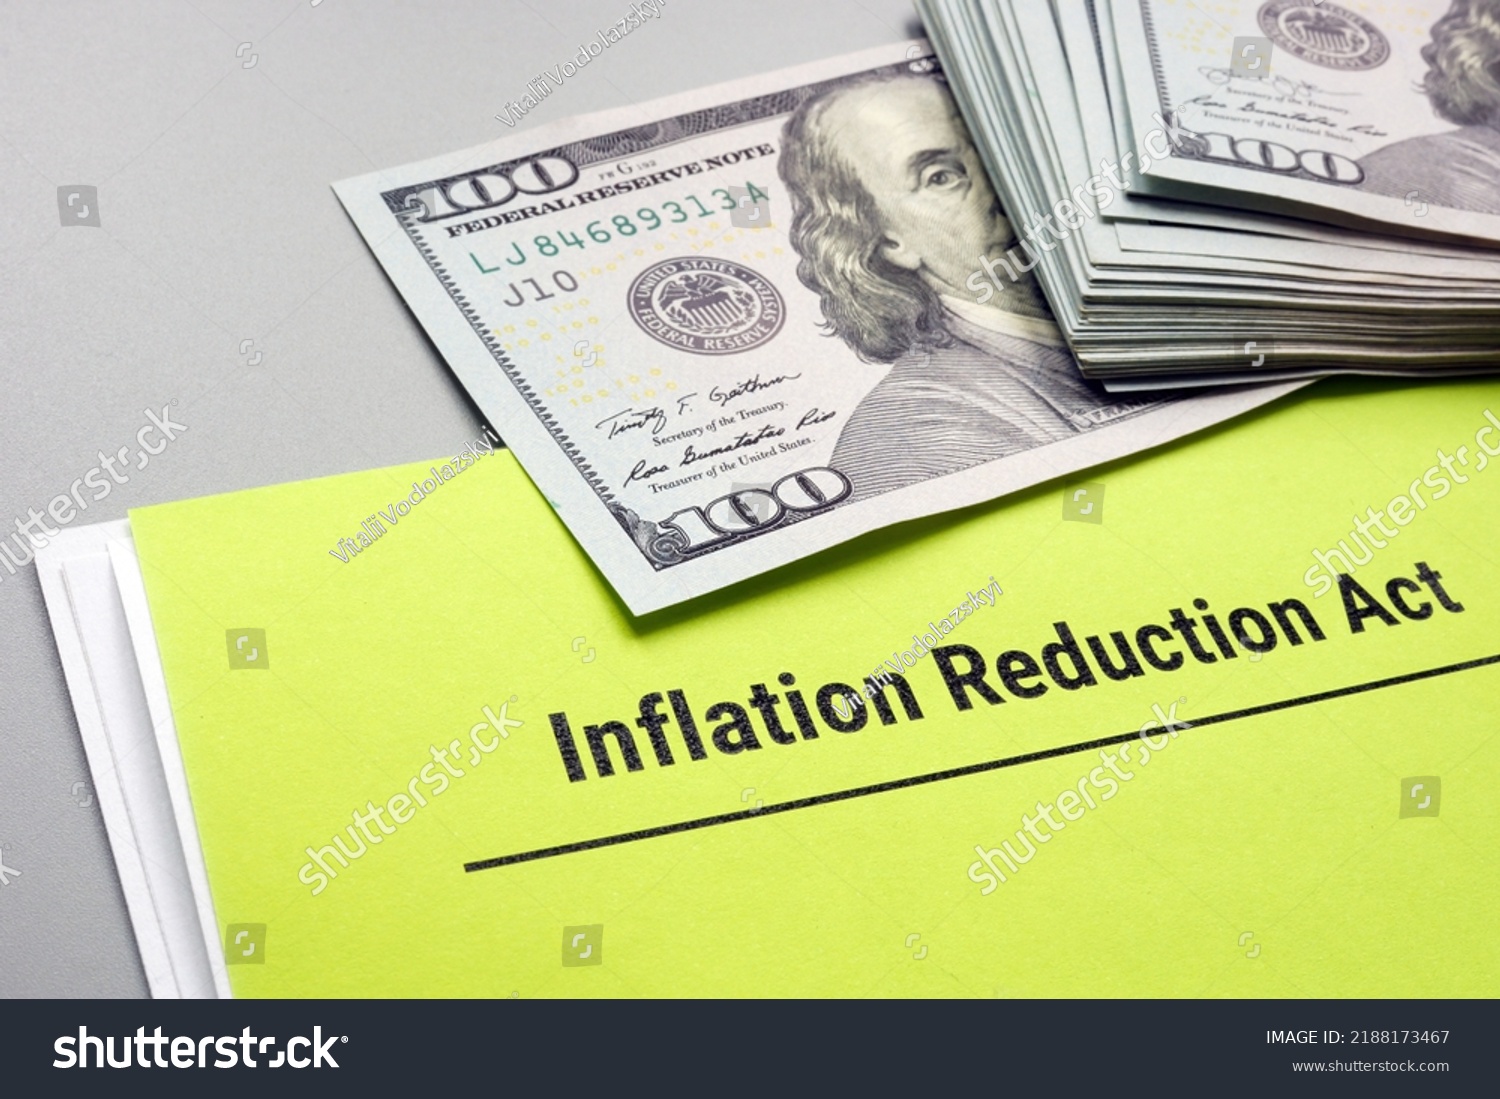 The Inflation Reduction Act of 2022 and cash on it. #2188173467